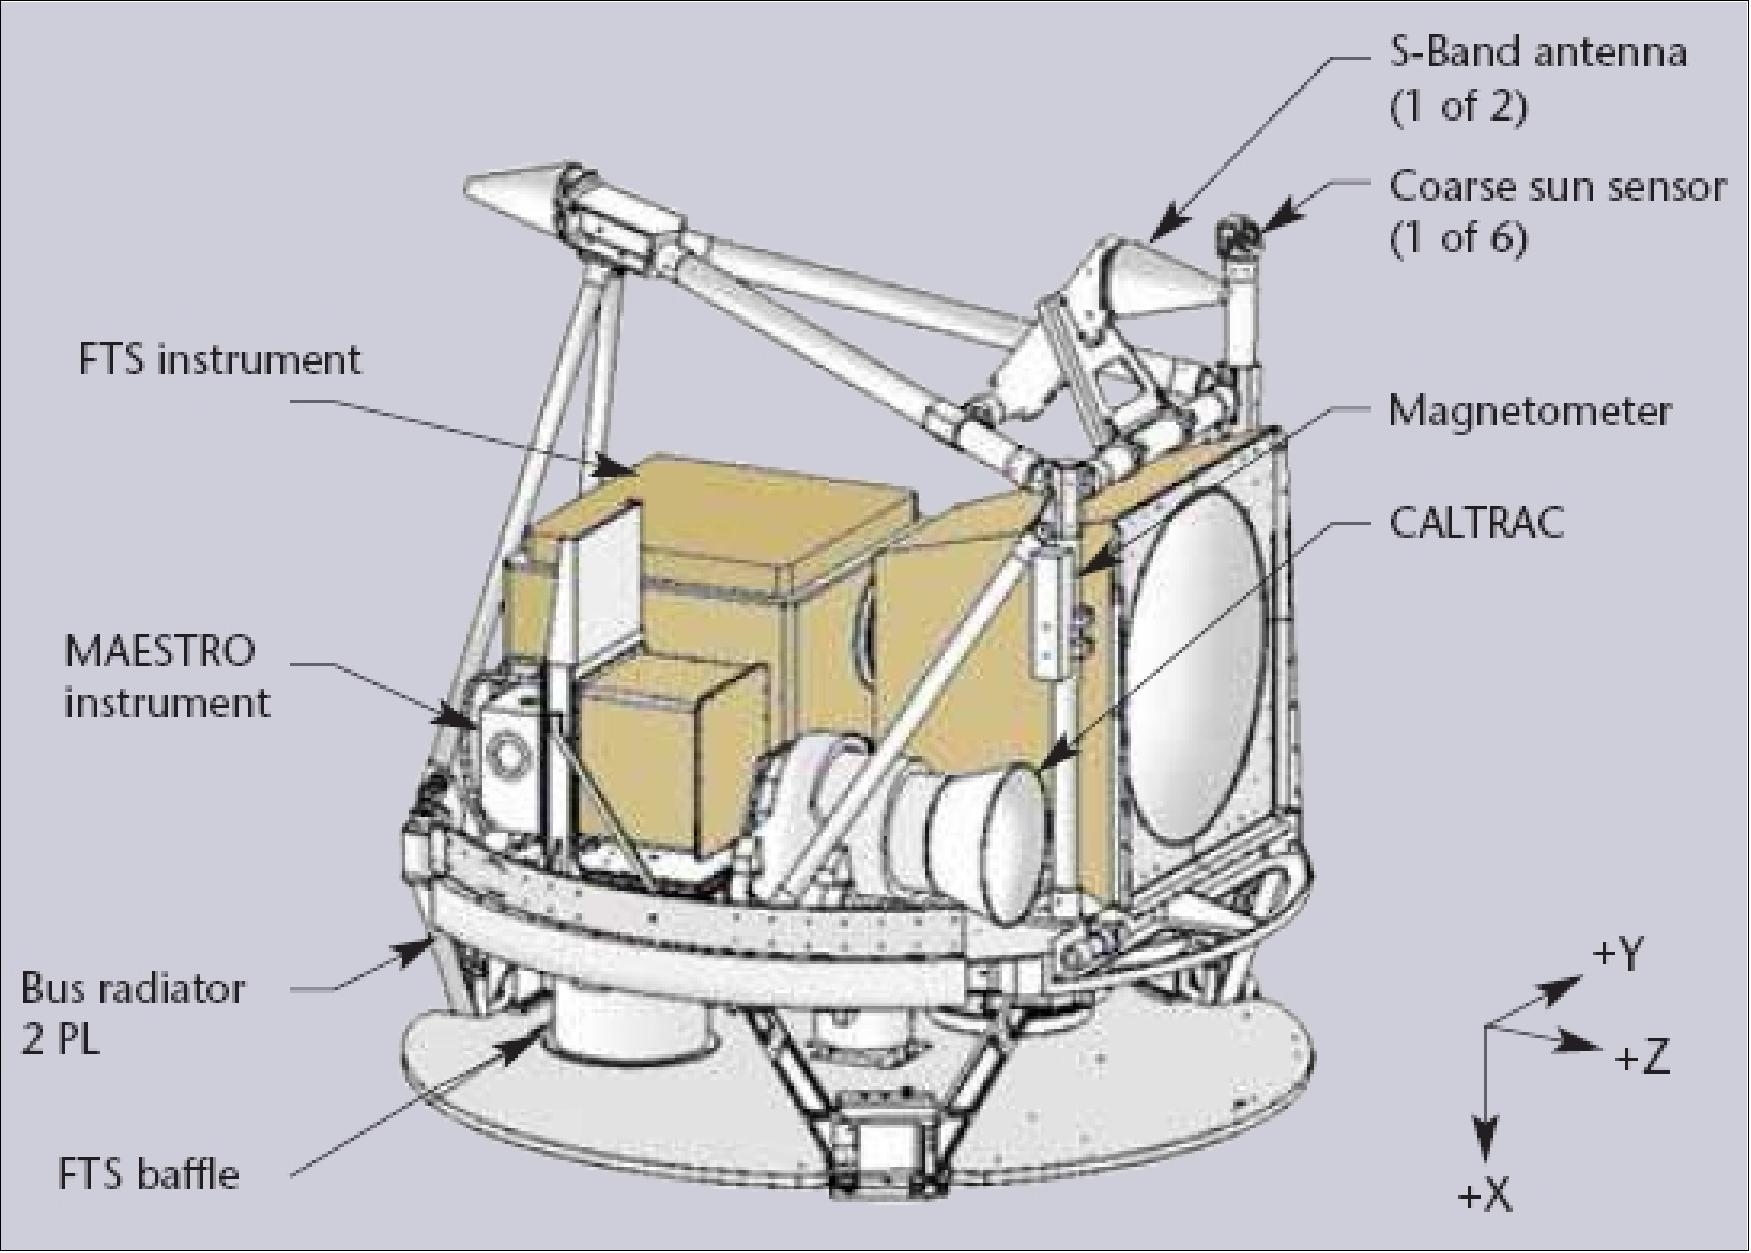 Figure 4: 2. The scientific instruments and some of the bus components aboard SciSat-1 (image credit: Bristol Aerospace)